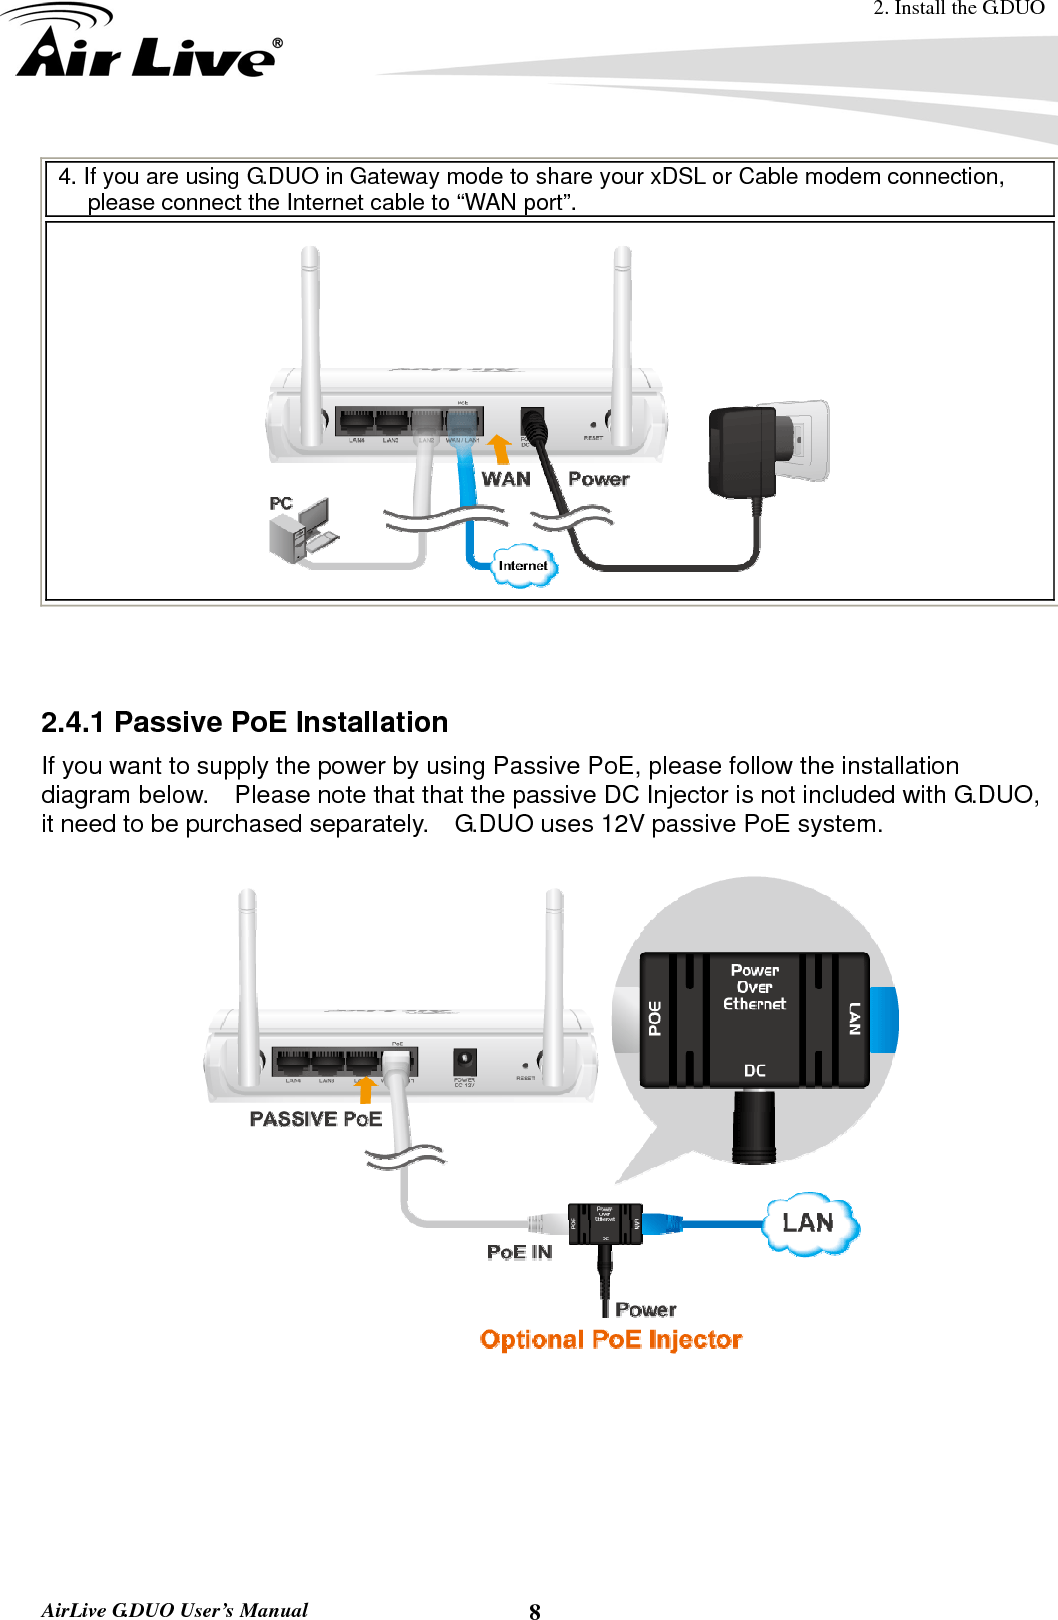 2. Install the G.DUO  AirLive G.DUO User’s Manual  84. If you are using G.DUO in Gateway mode to share your xDSL or Cable modem connection, please connect the Internet cable to “WAN port”.     2.4.1 Passive PoE Installation If you want to supply the power by using Passive PoE, please follow the installation diagram below.  Please note that that the passive DC Injector is not included with G.DUO, it need to be purchased separately.    G.DUO uses 12V passive PoE system.        